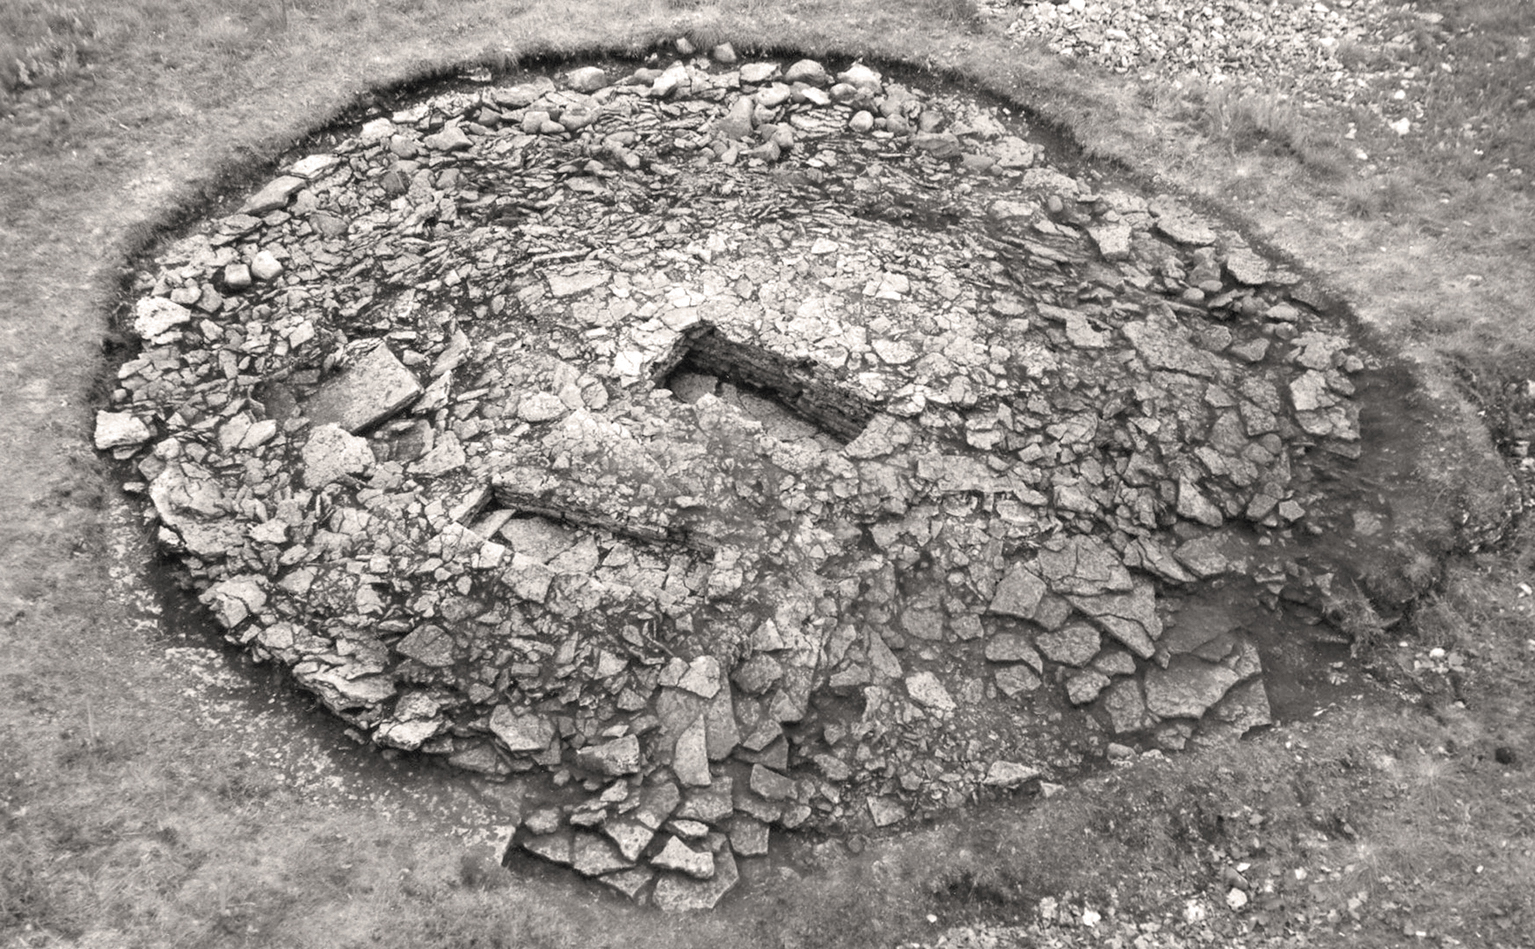 Rebala stone-cist grave. Circle made of stones with graves in the centre.